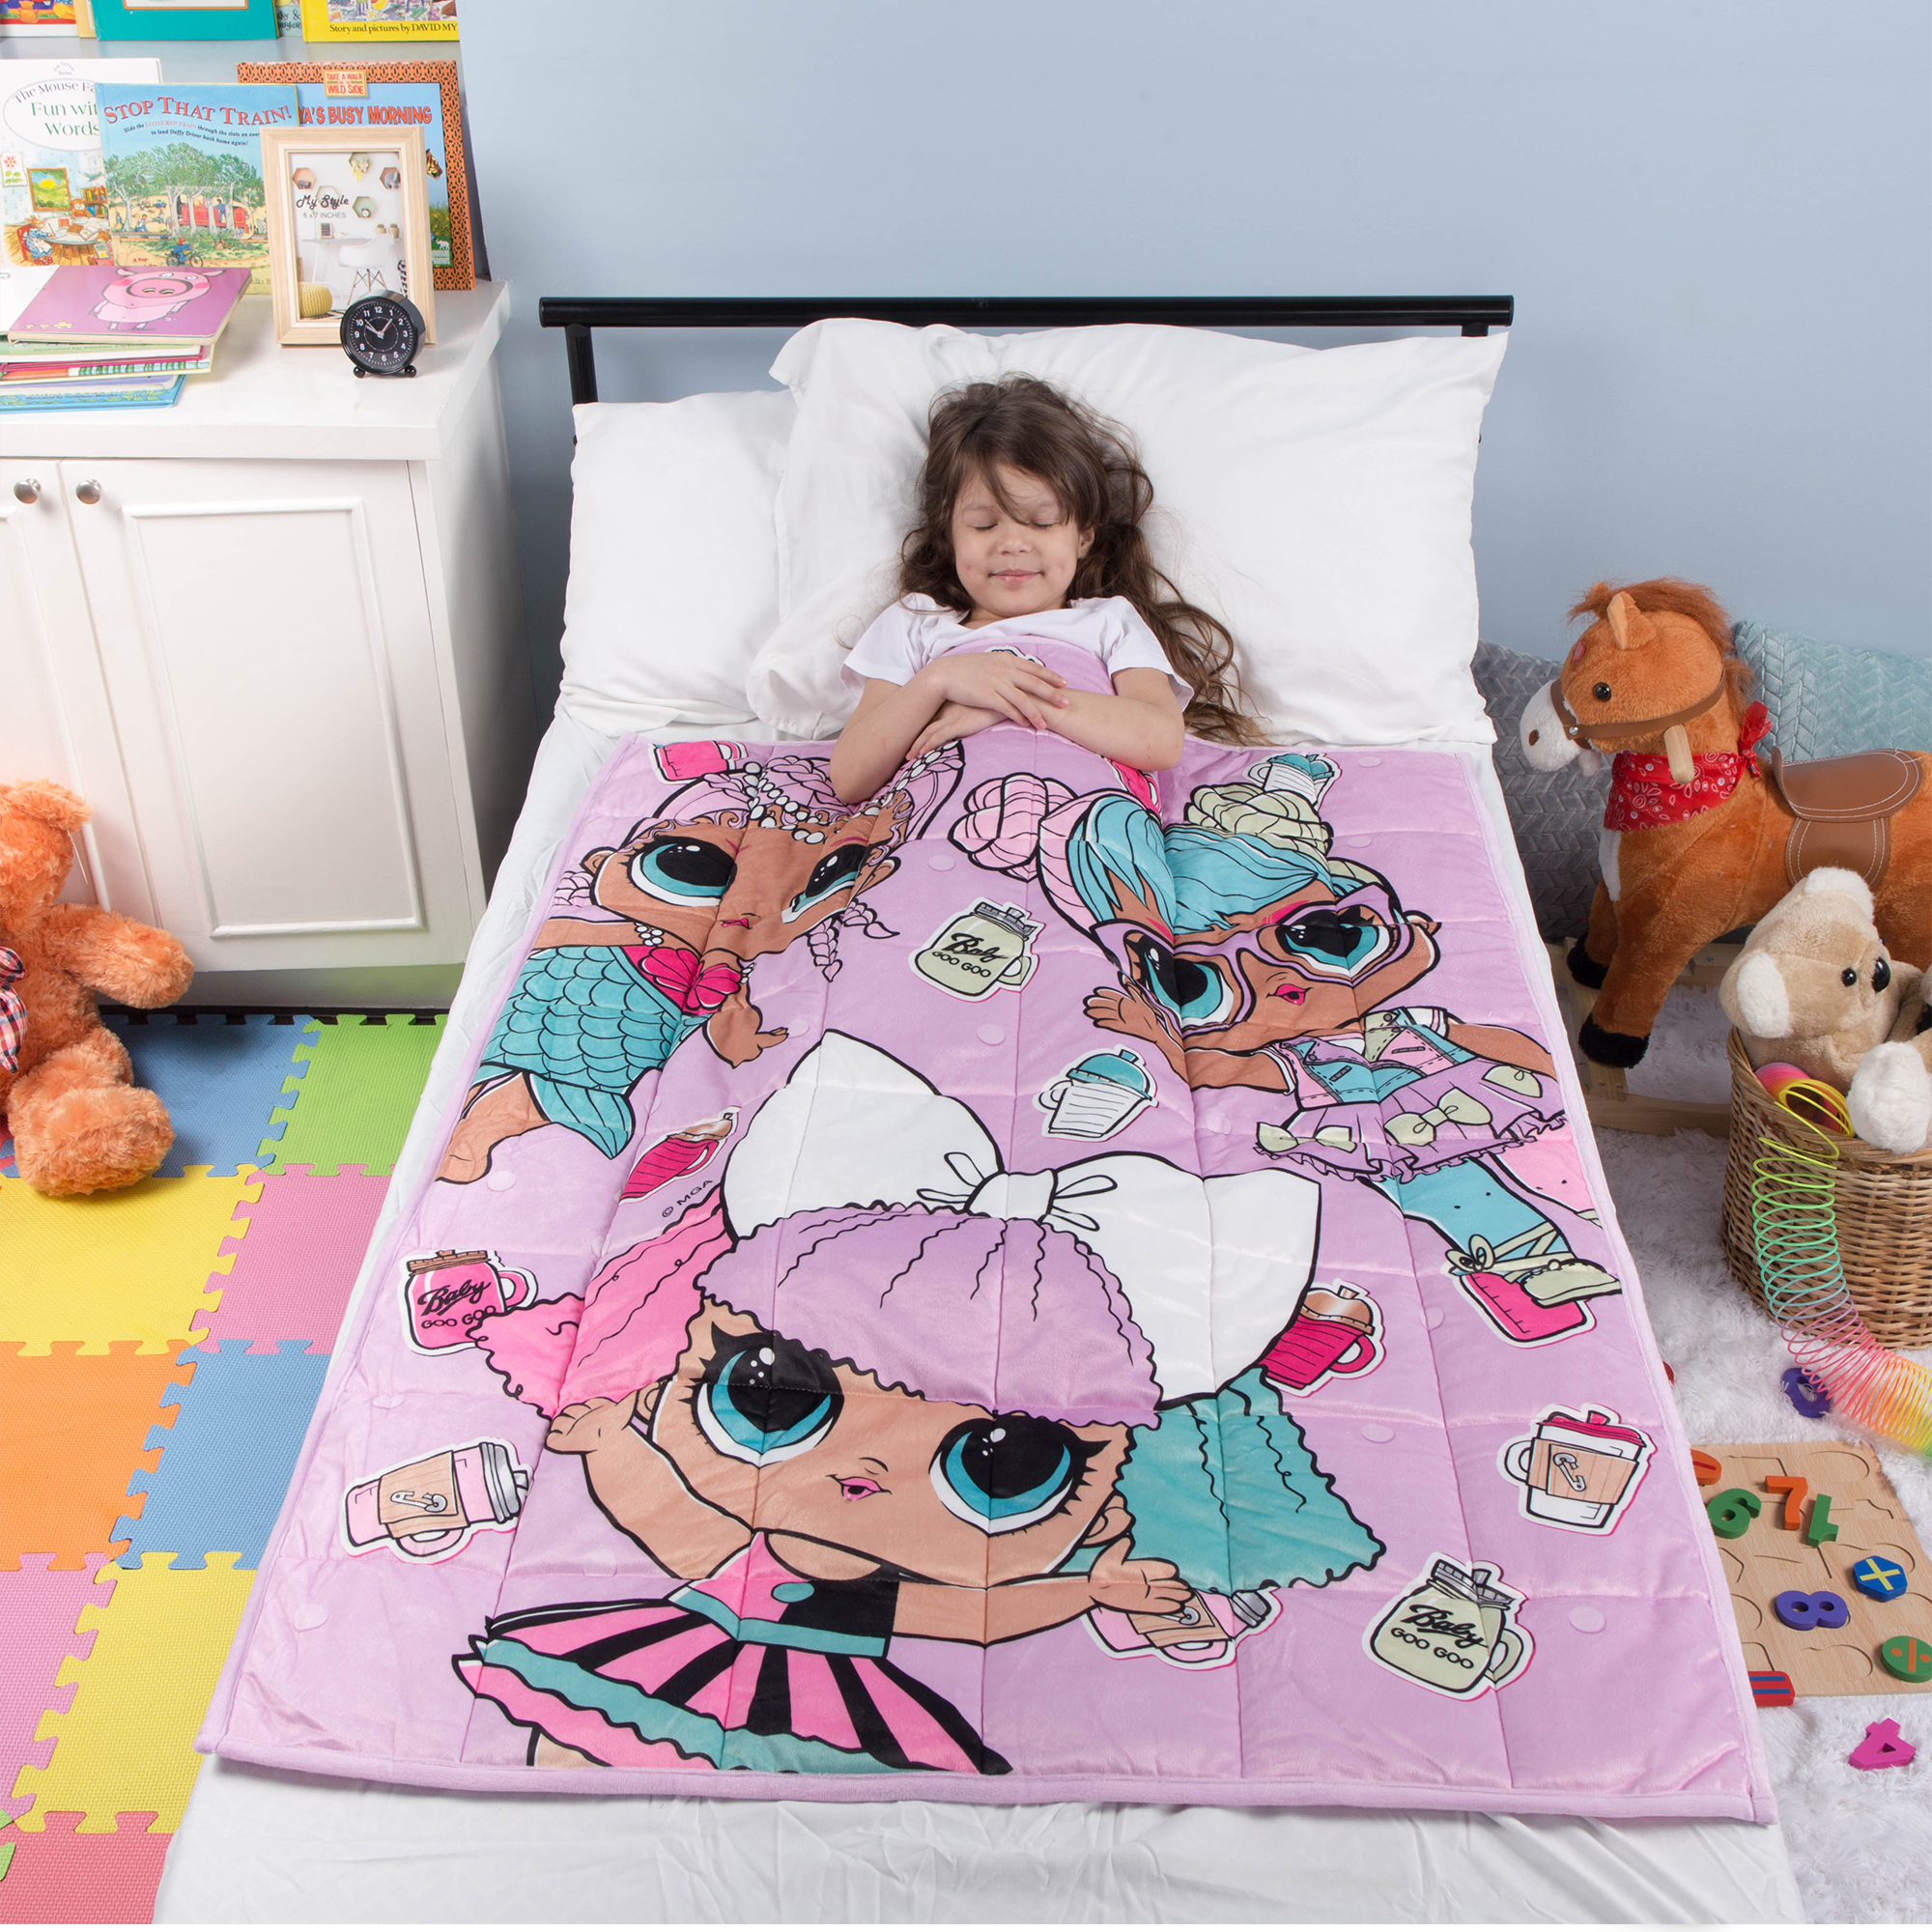 LOL Surprise Frozen Kids Weighted Blanket, 4.5lb, 36 x 48, Pink, MGA - image 1 of 11